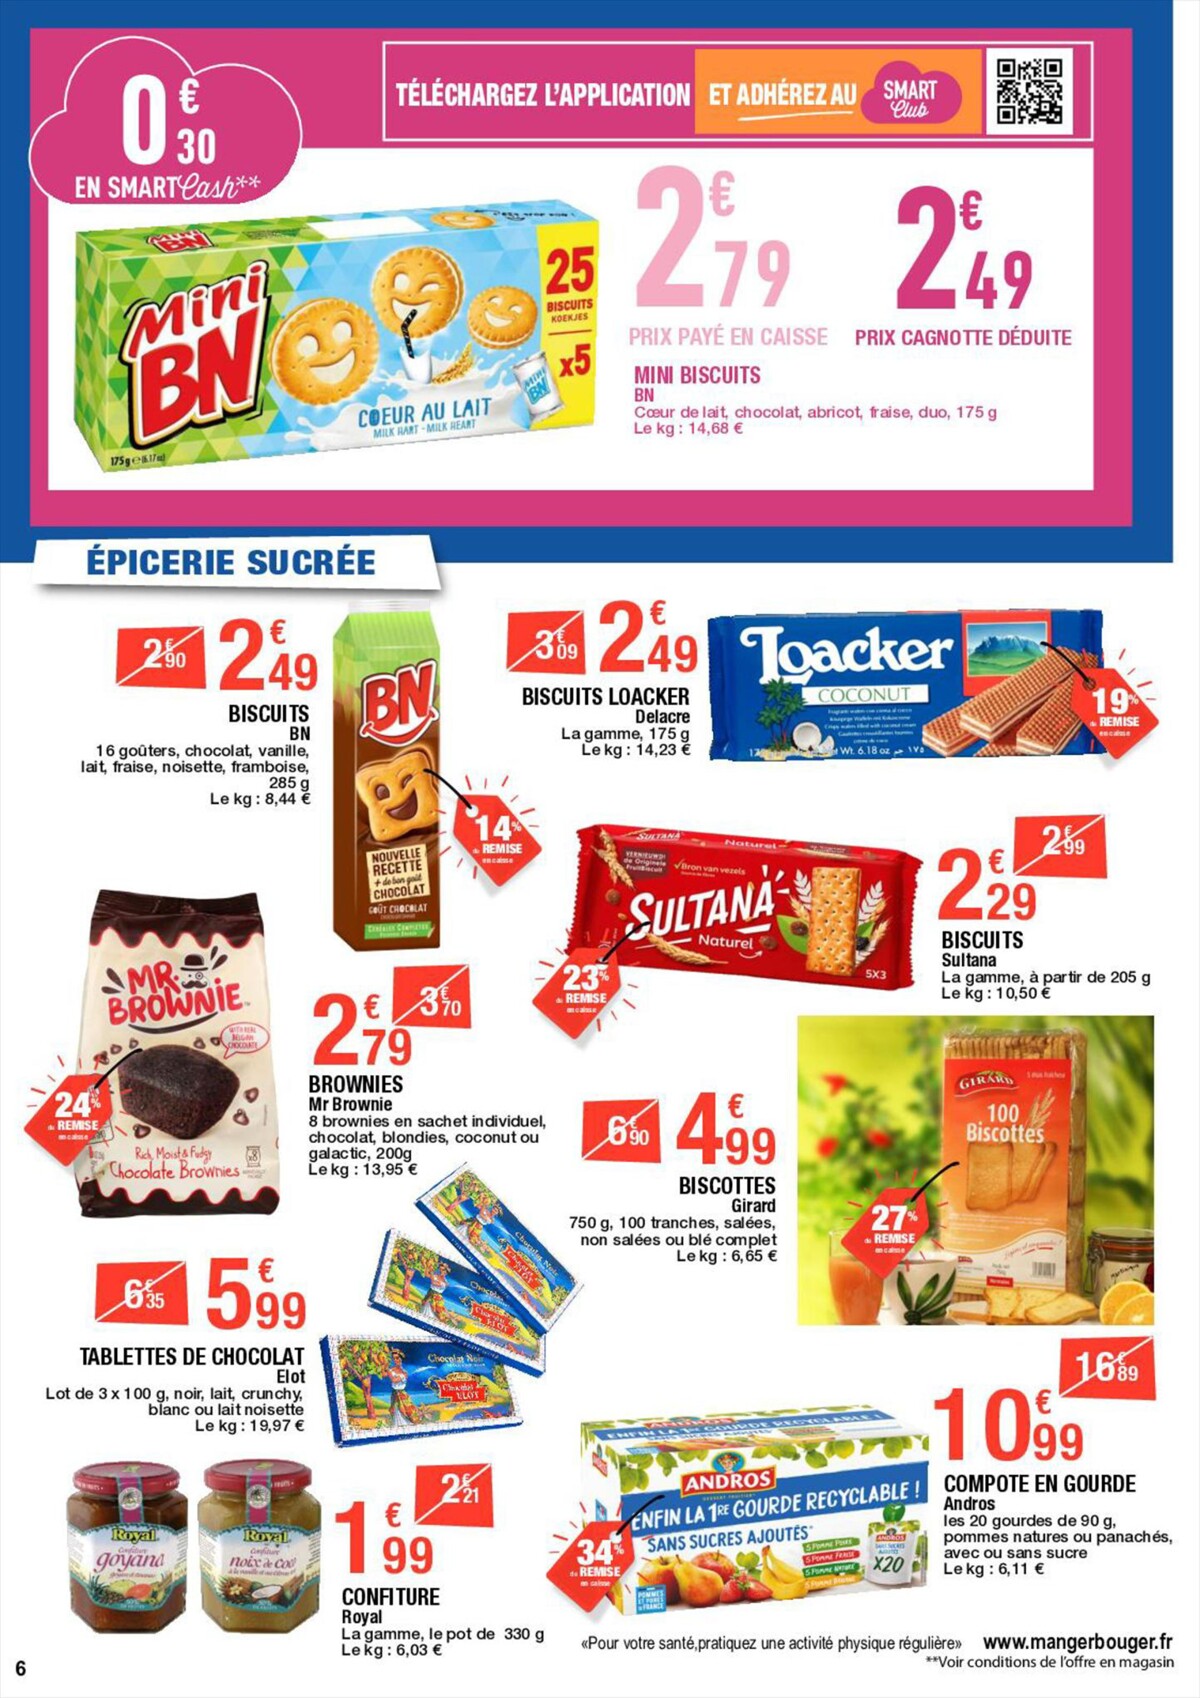 Catalogue Carrefour Special MDD, page 00006